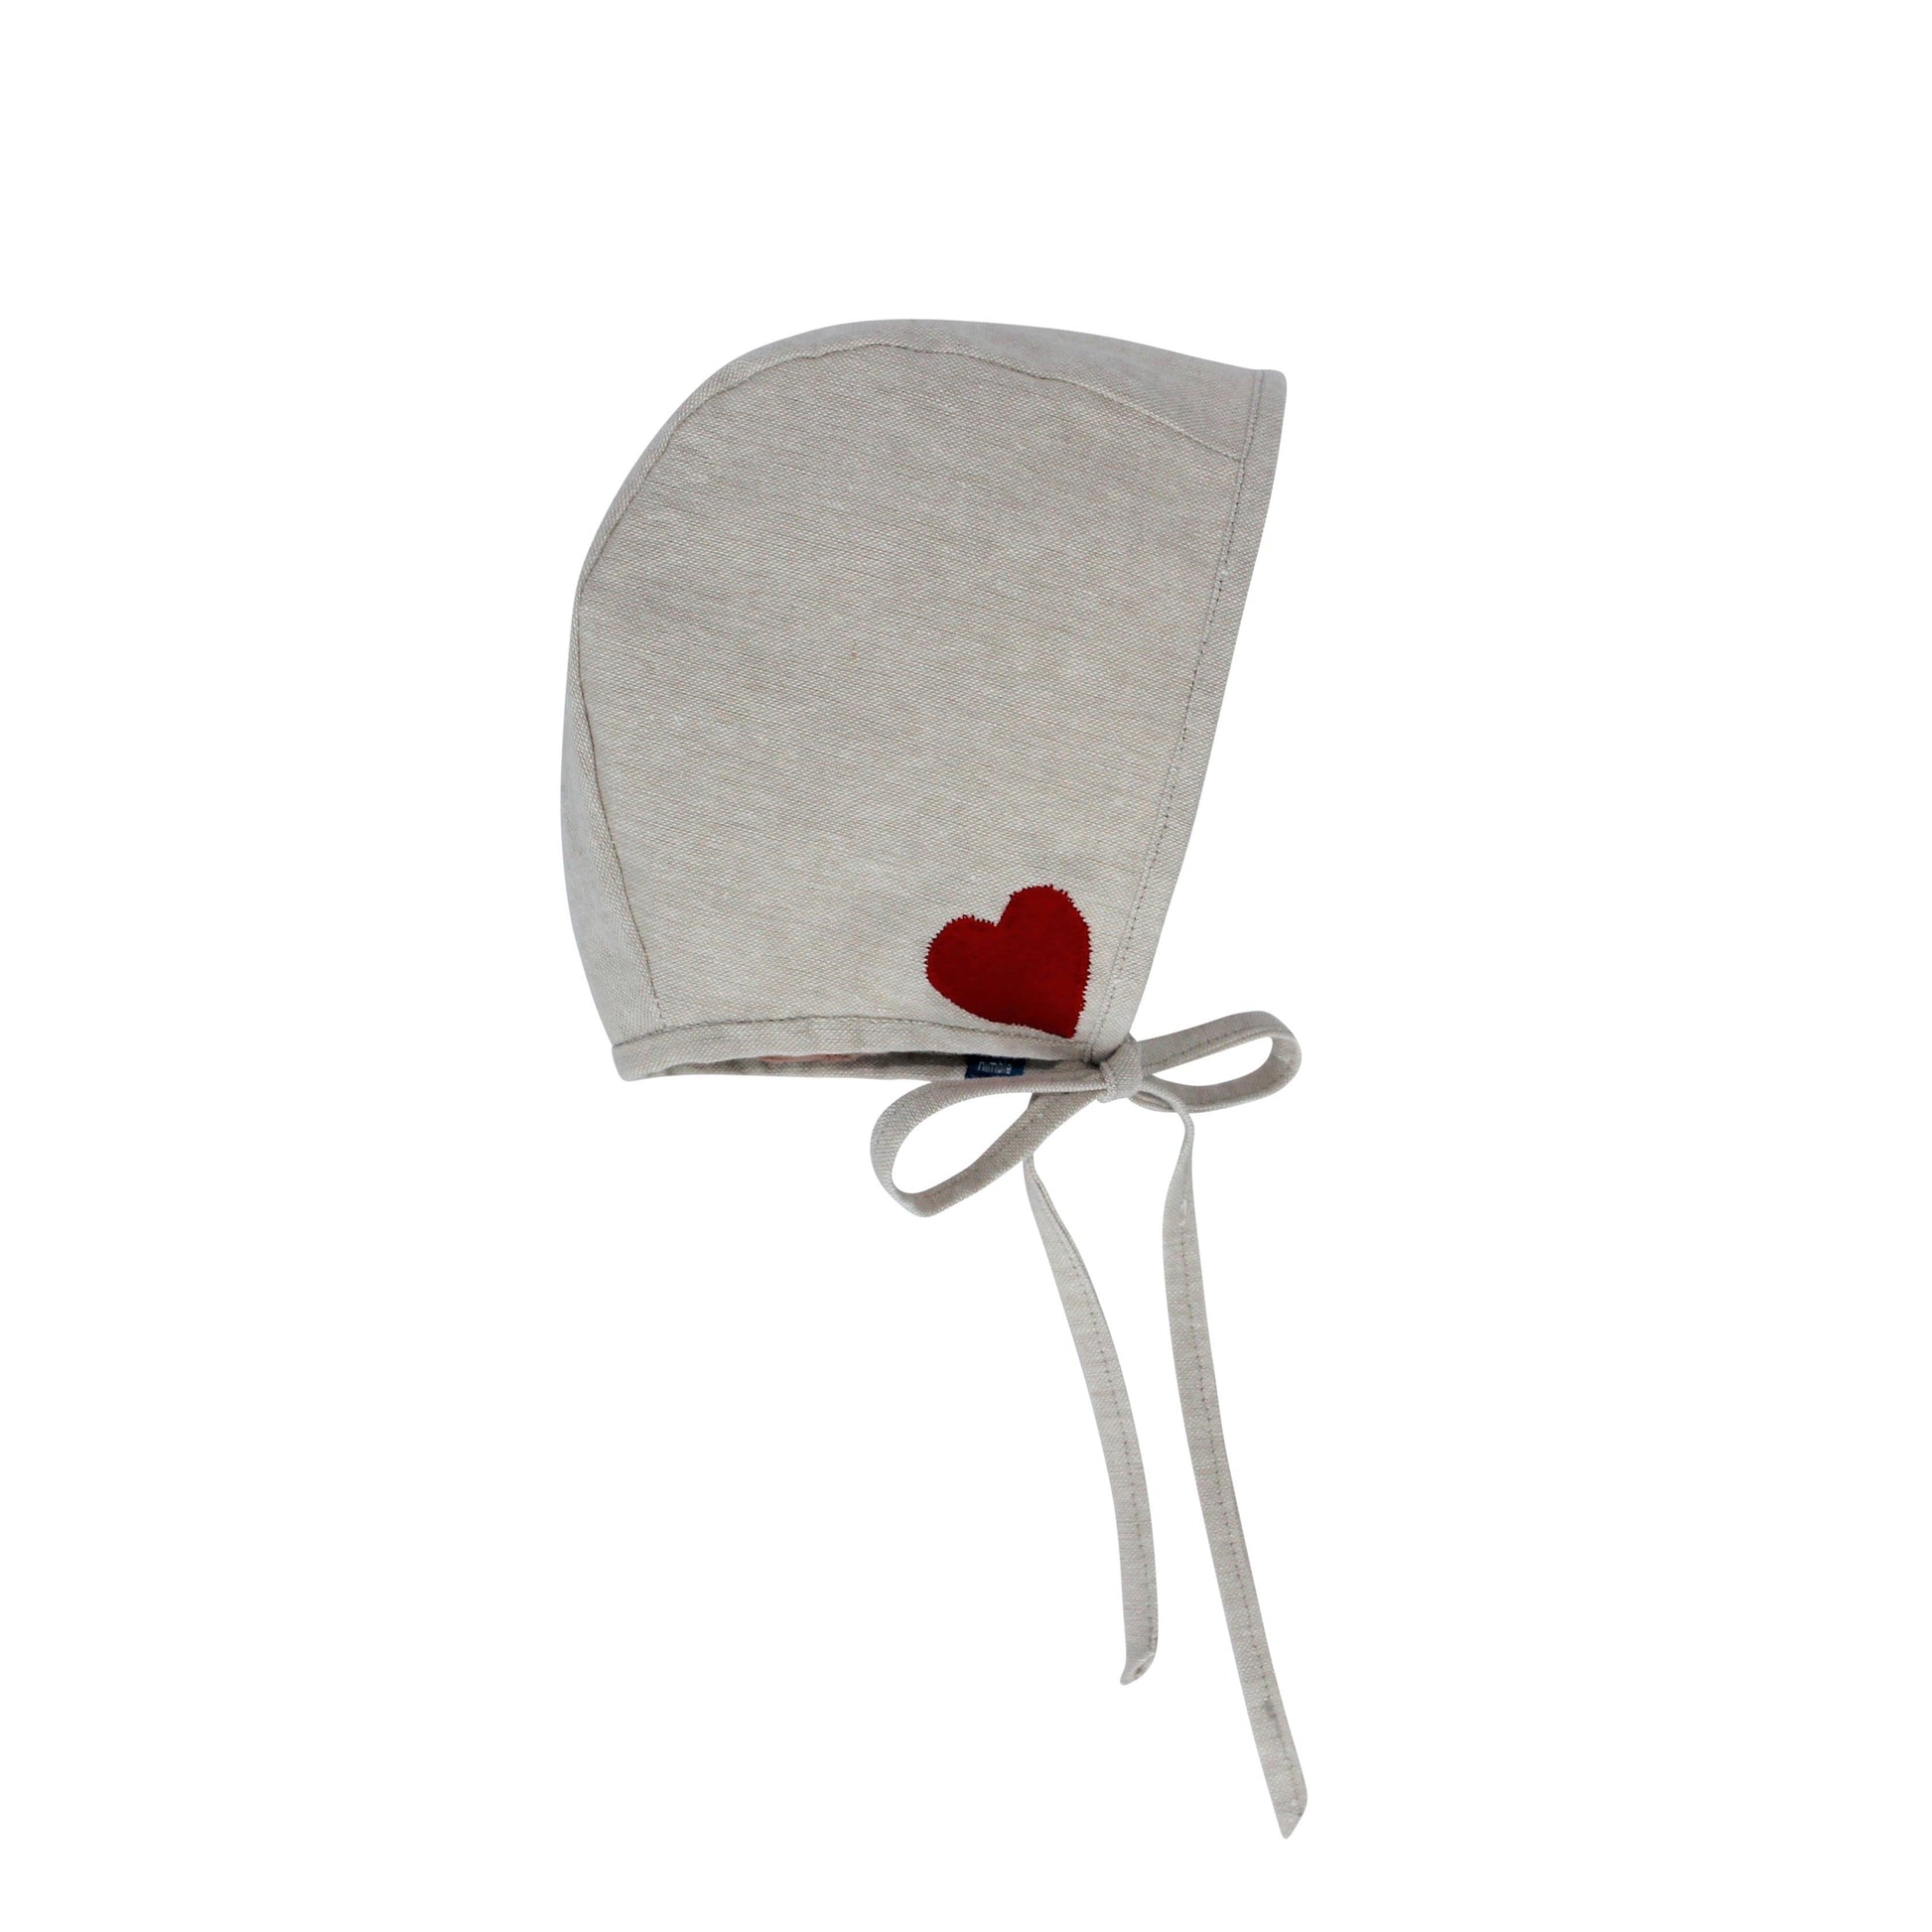 Embroidered flax colored heart baby bonnet.